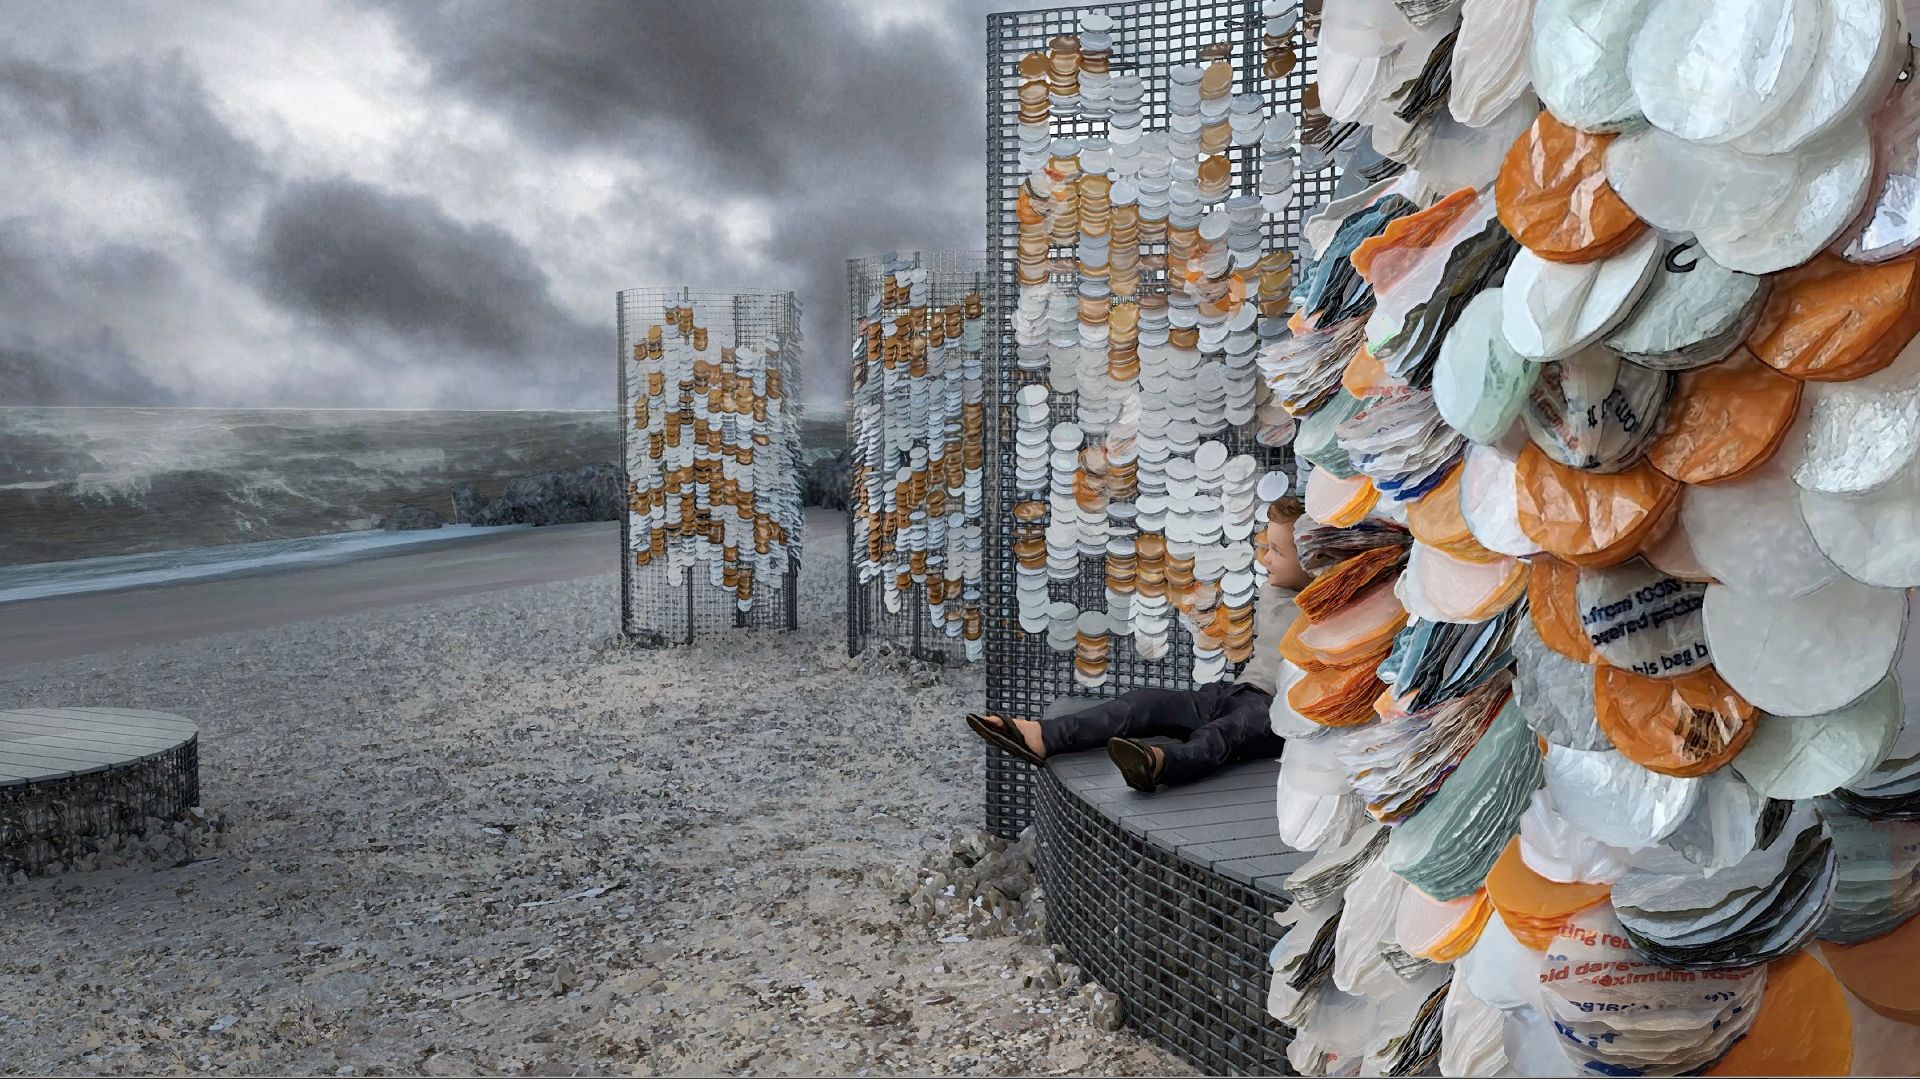 A photograph of tall metal grids covered in discs made from mostly orange and white plastic bags, displayed on a beach. A small child sits next to one.